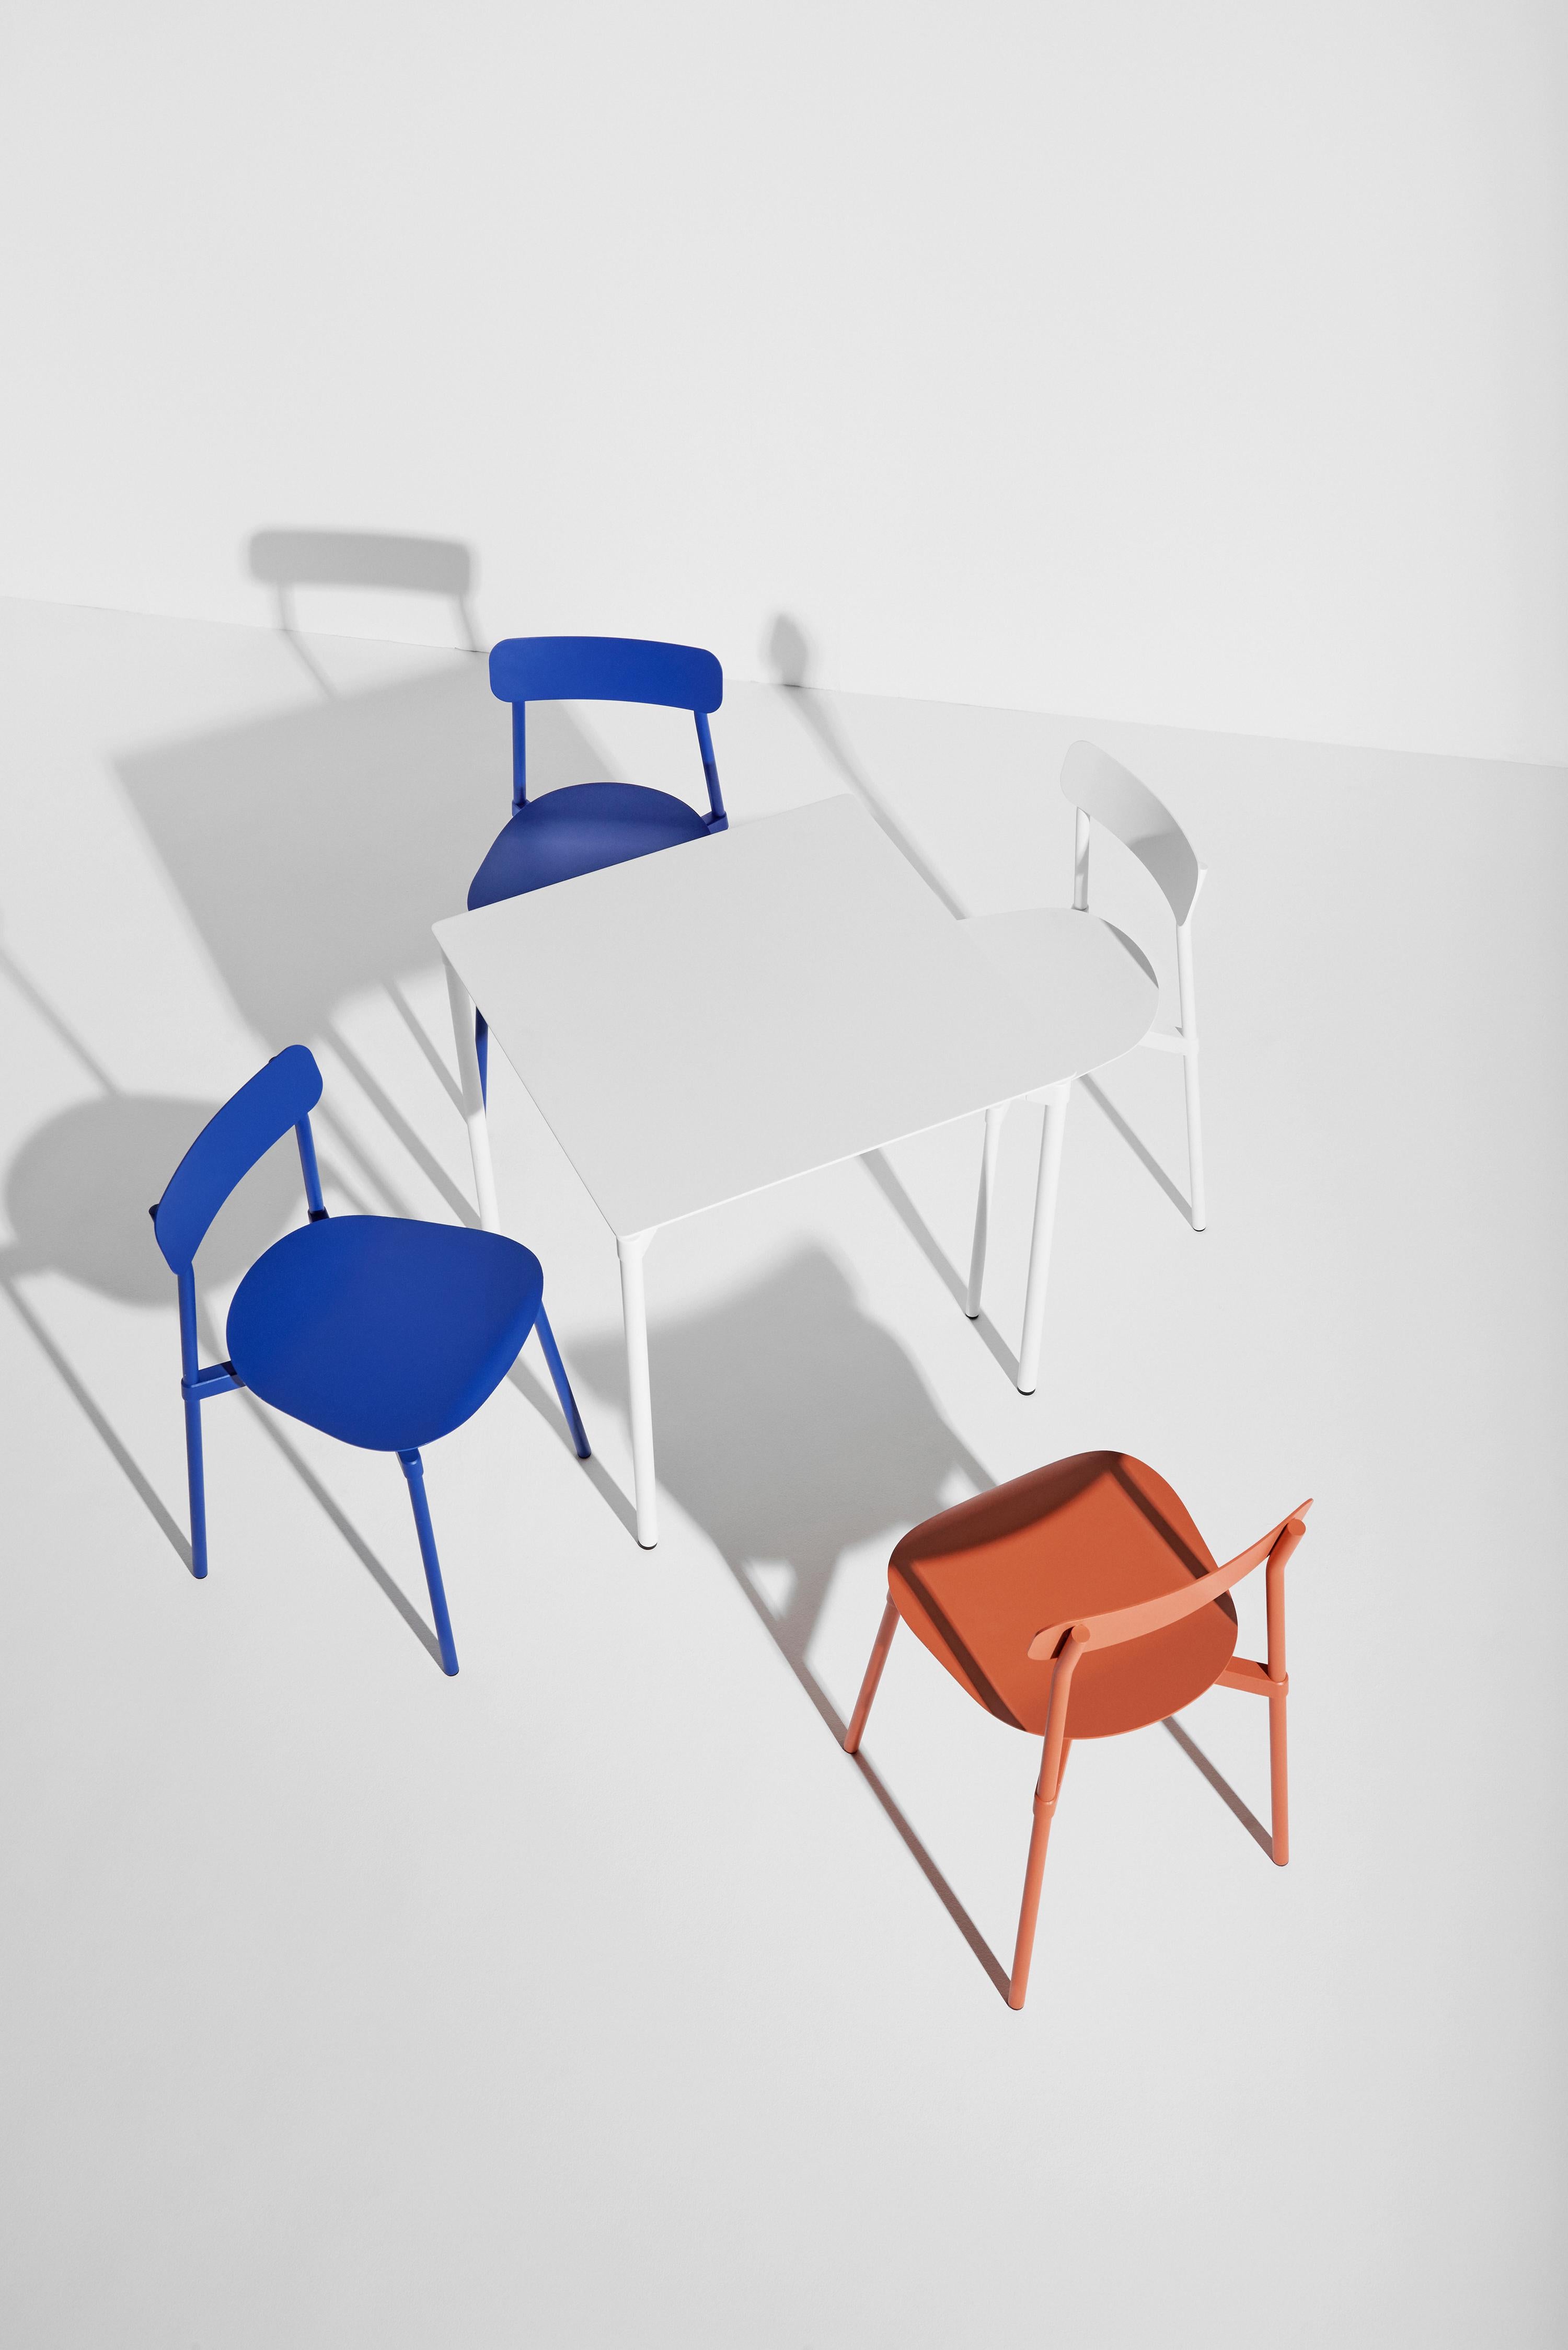 Petite Friture Fromme Chair in Blue Aluminium by Tom Chung, 2019 For Sale 4